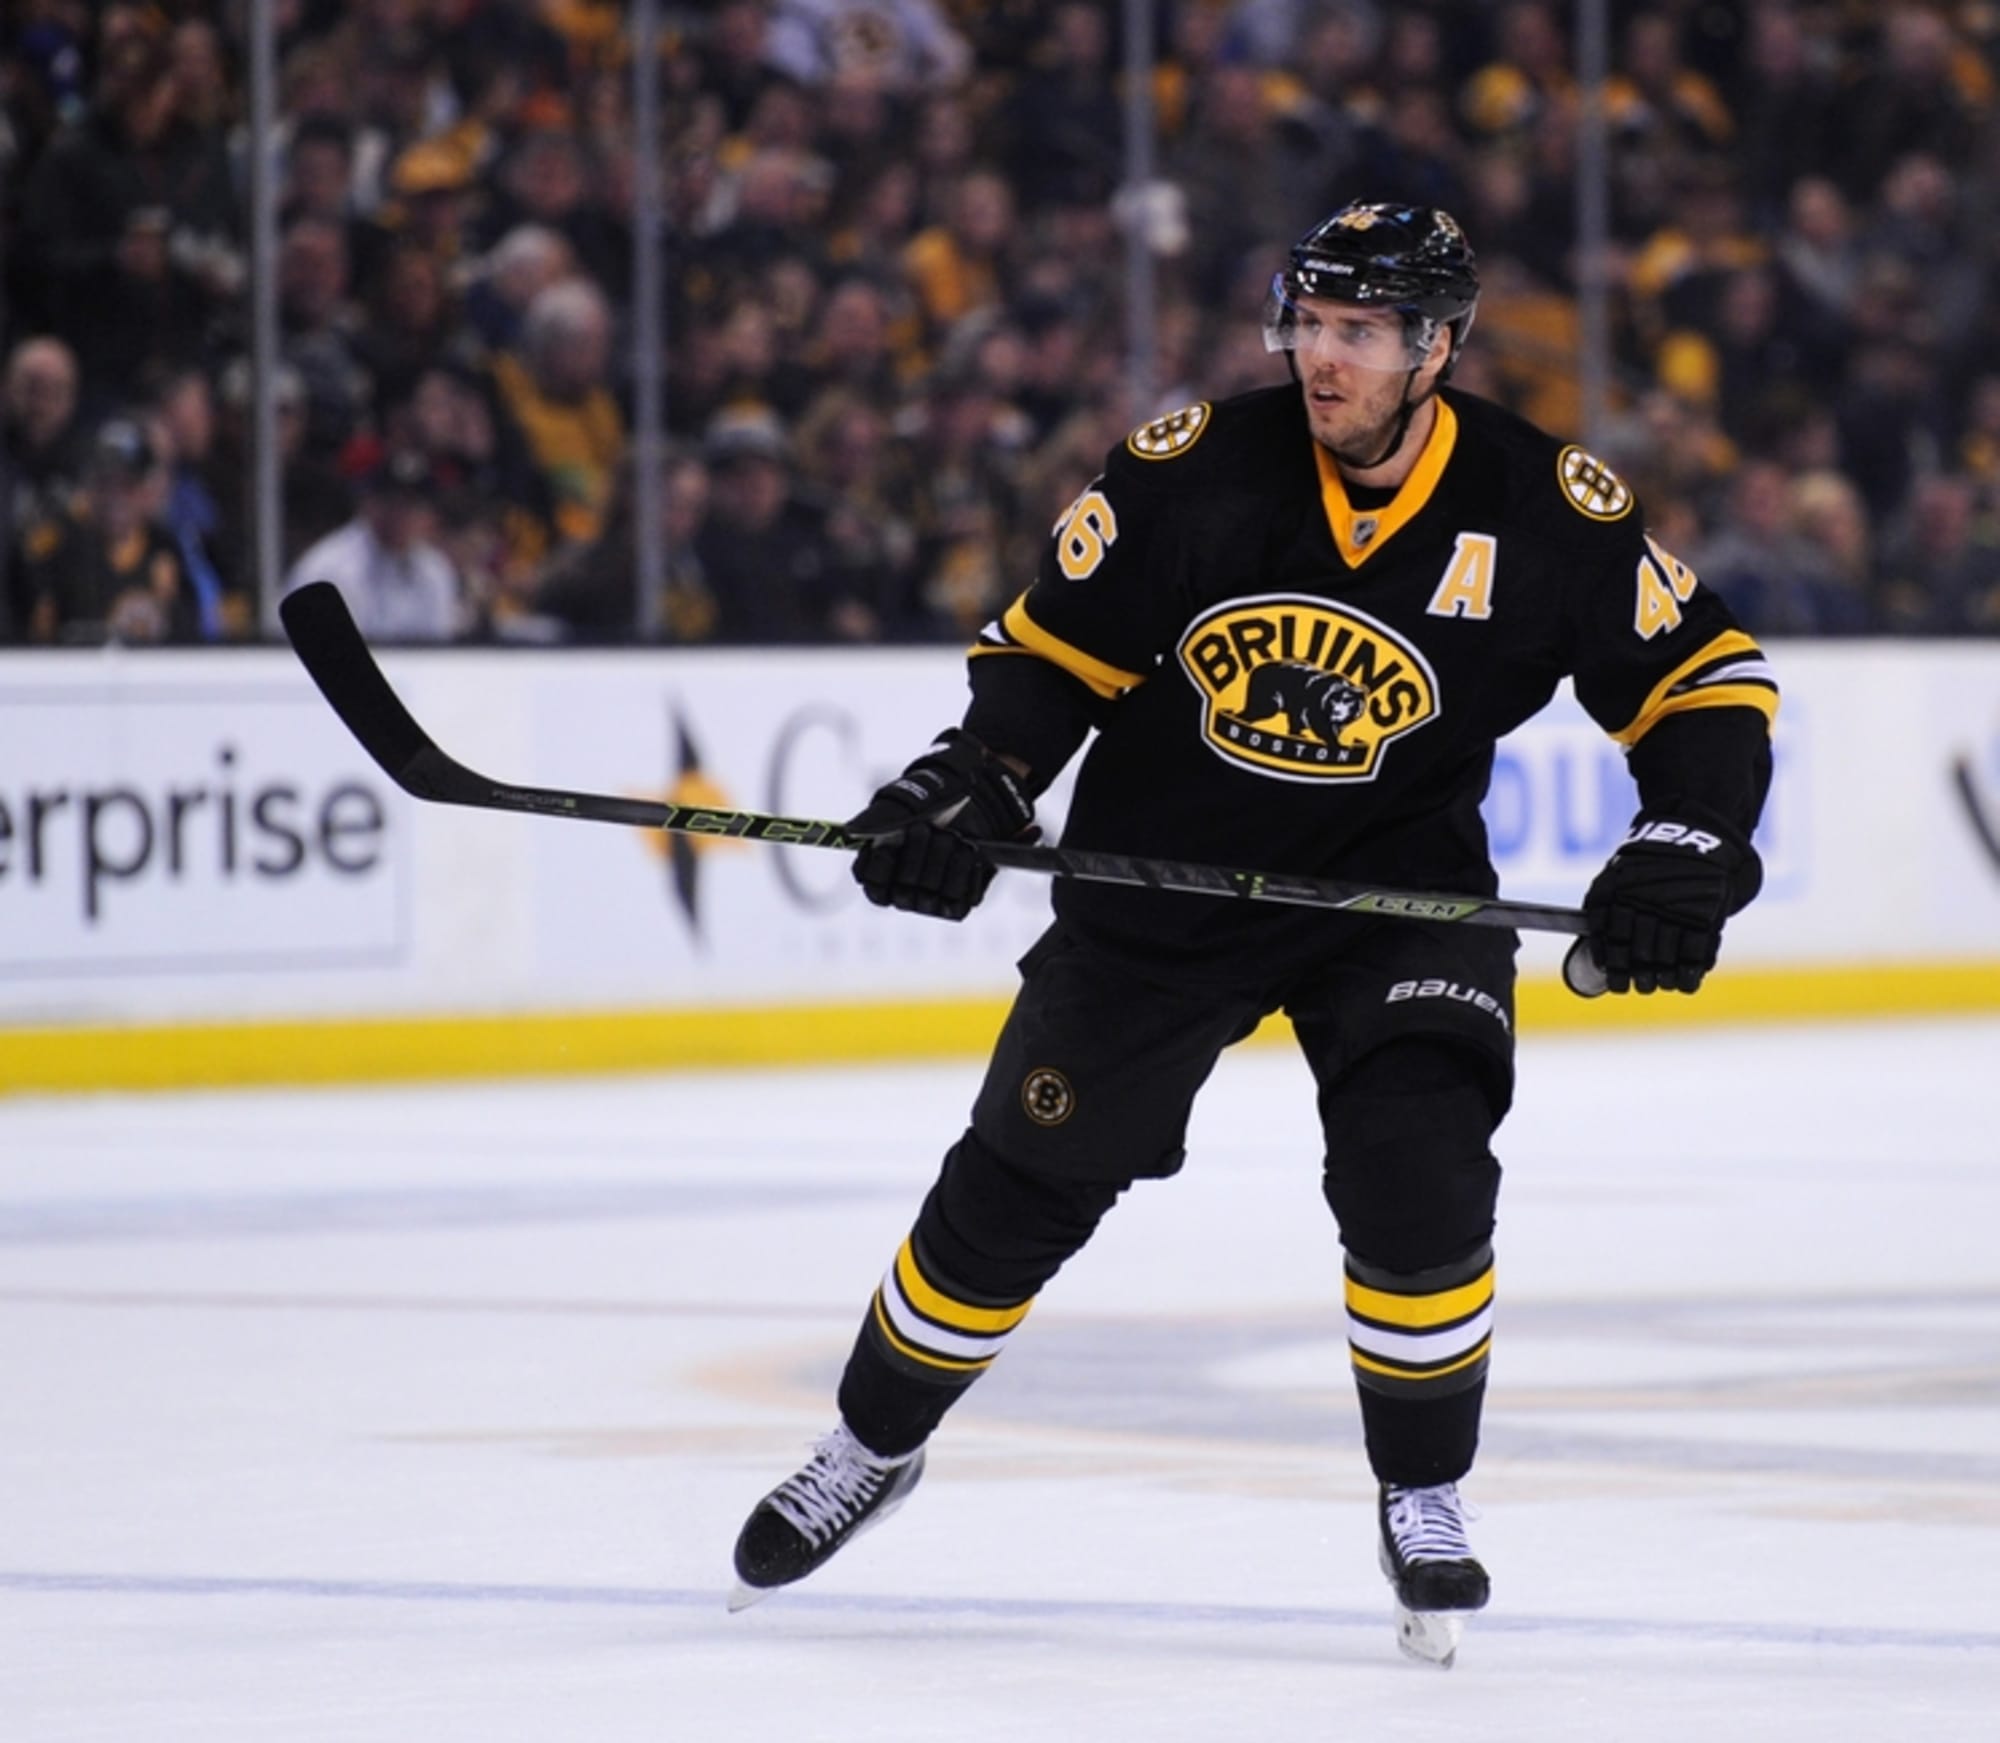 Krejci Moves On From Boston Bruins, Heads Home To Czech